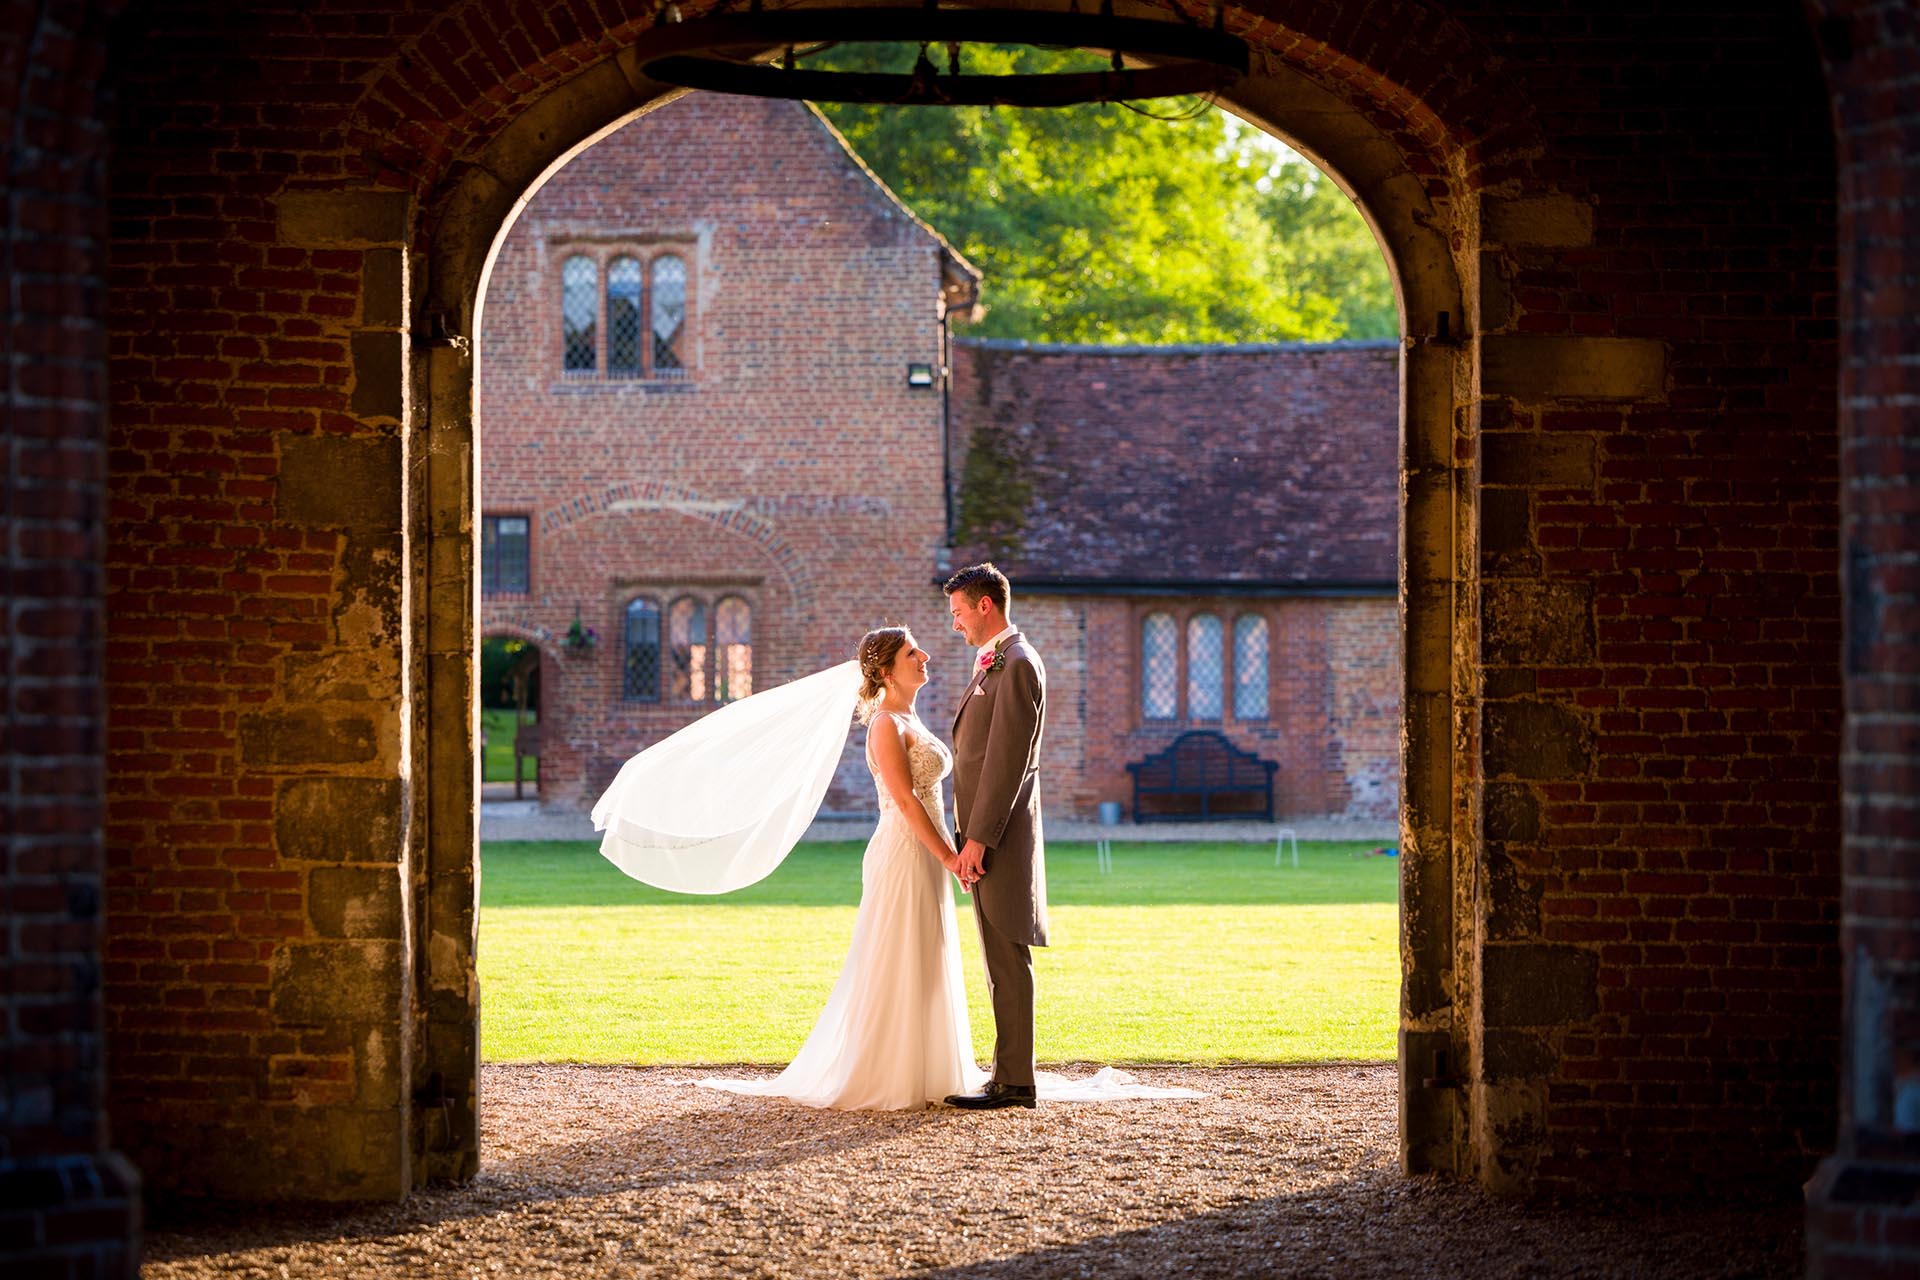 Bride and groom photograph by Essex wedding photographer at Leez Priory Great Leighs Chelmsford